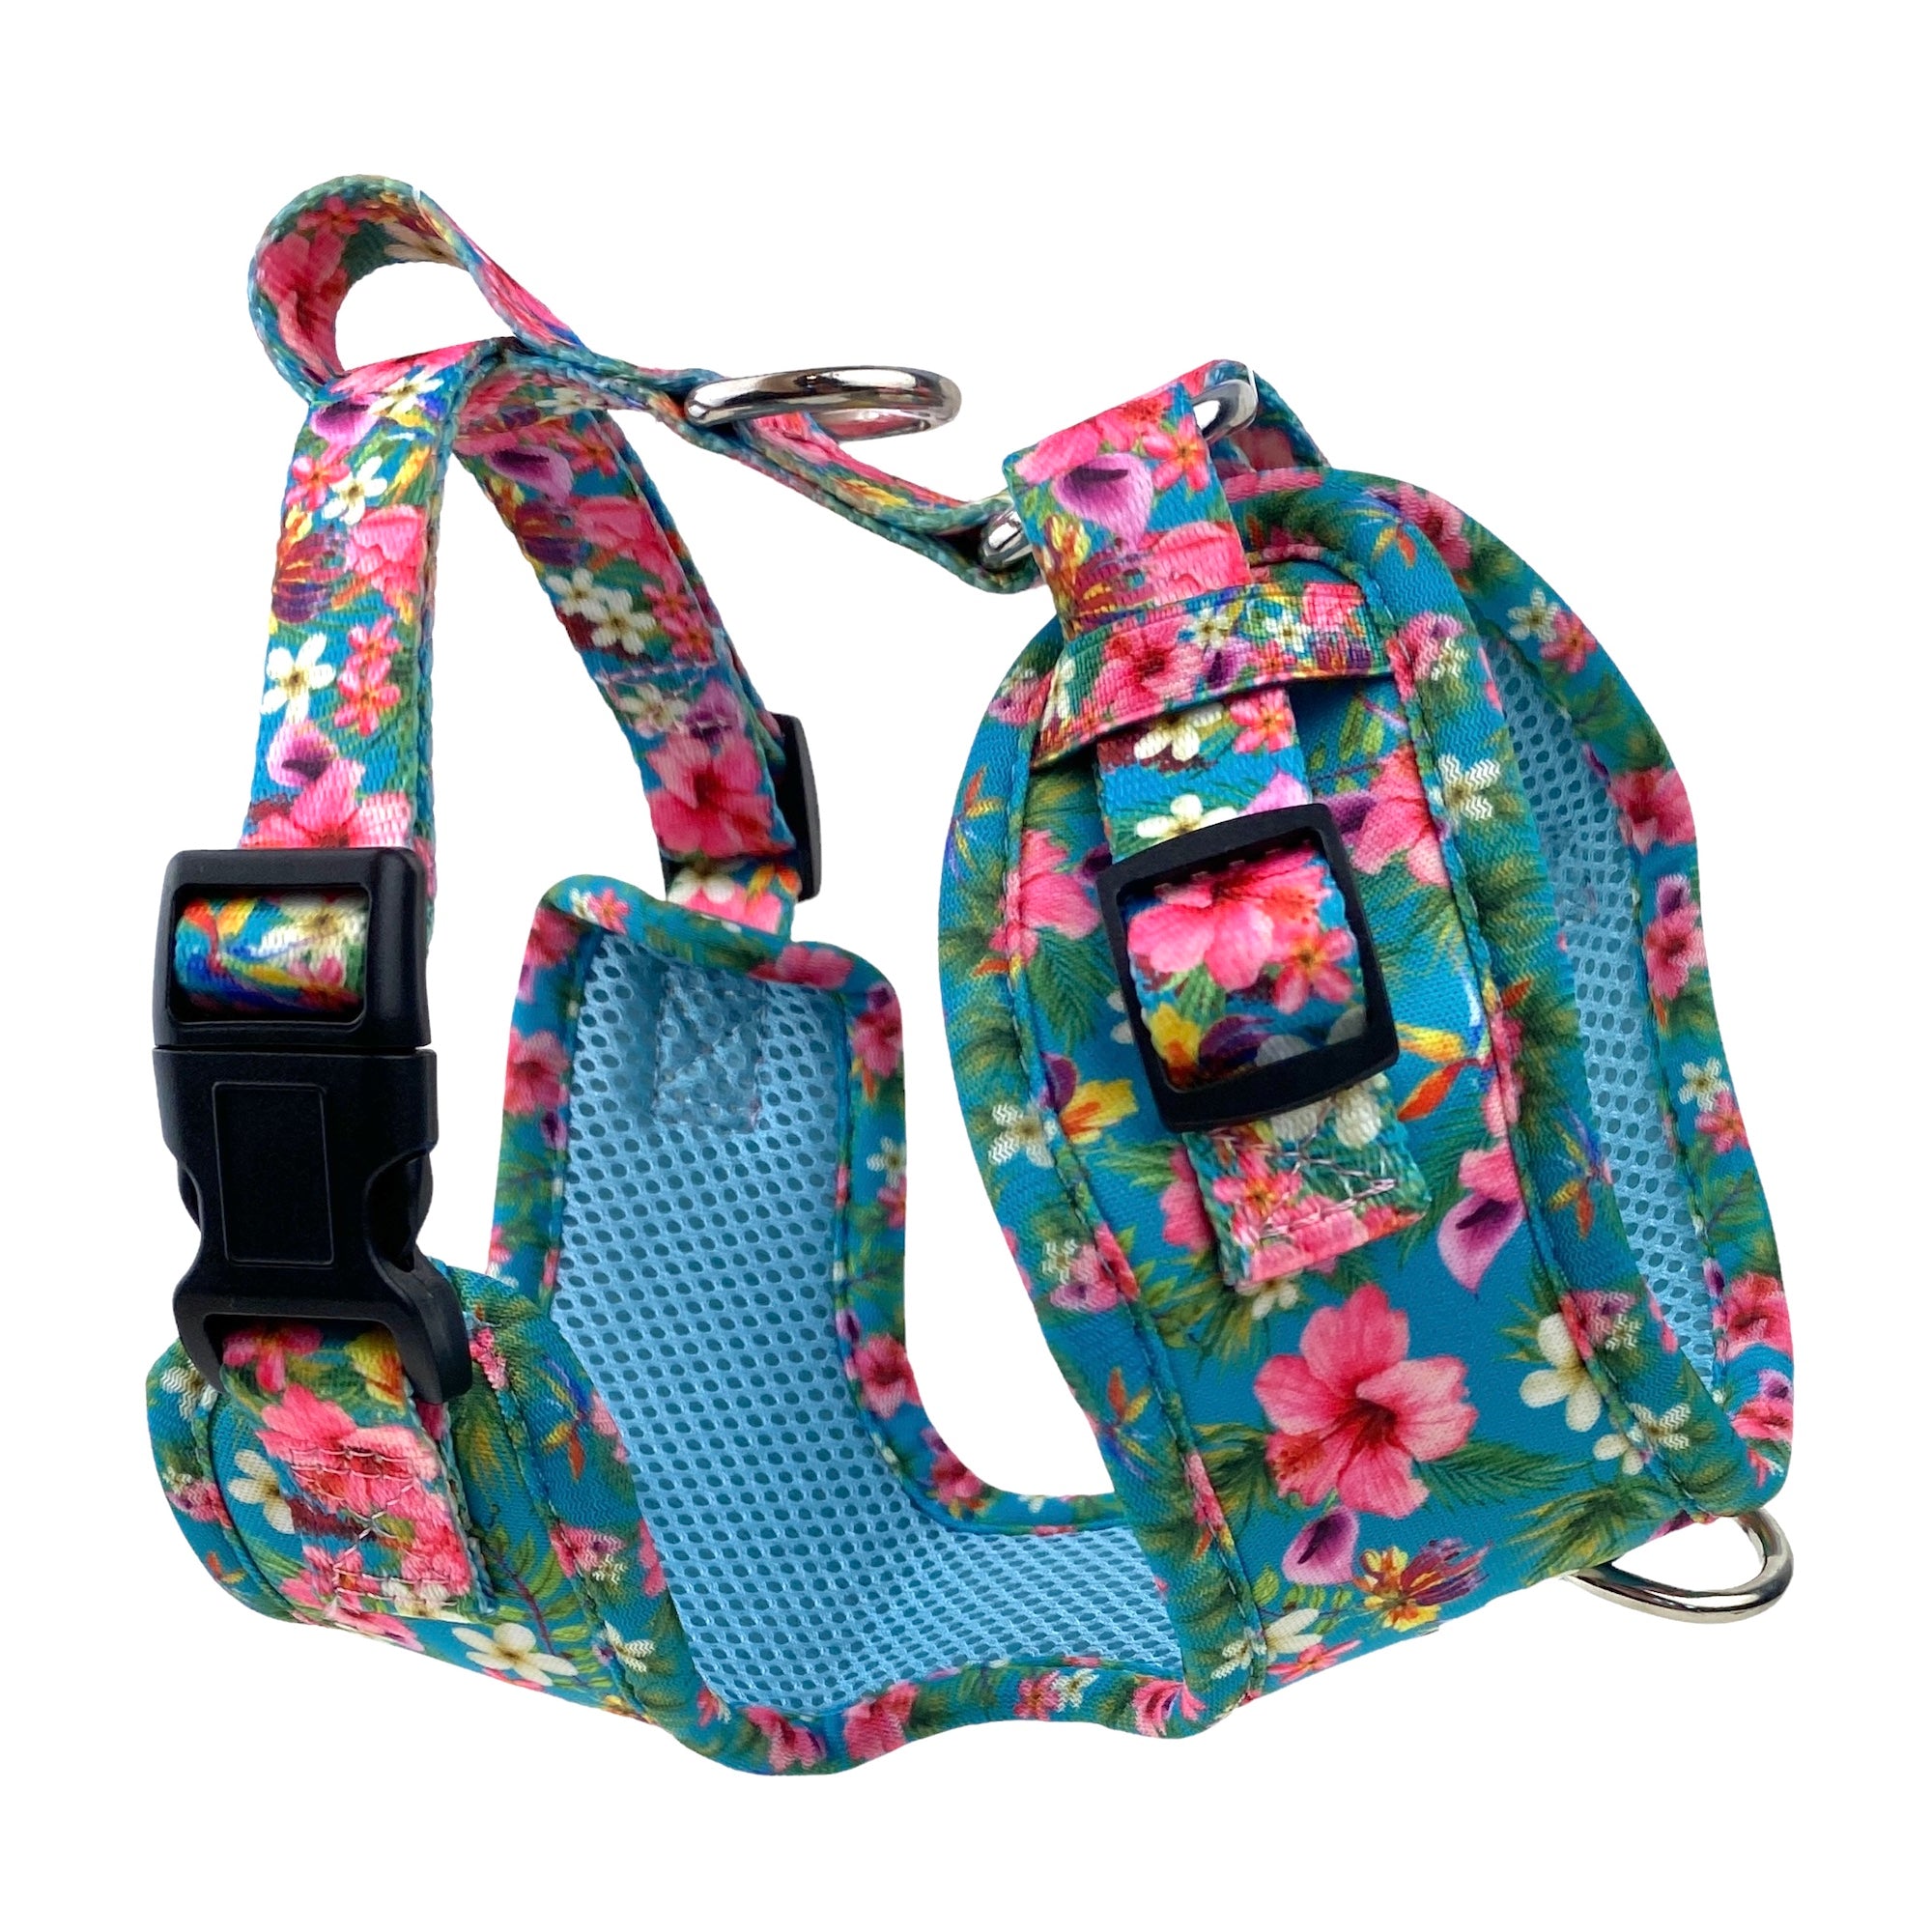 a 3D image of a no escape harness from Fearless pet in bright teal with Hawaiian flowers print girl dog harness 